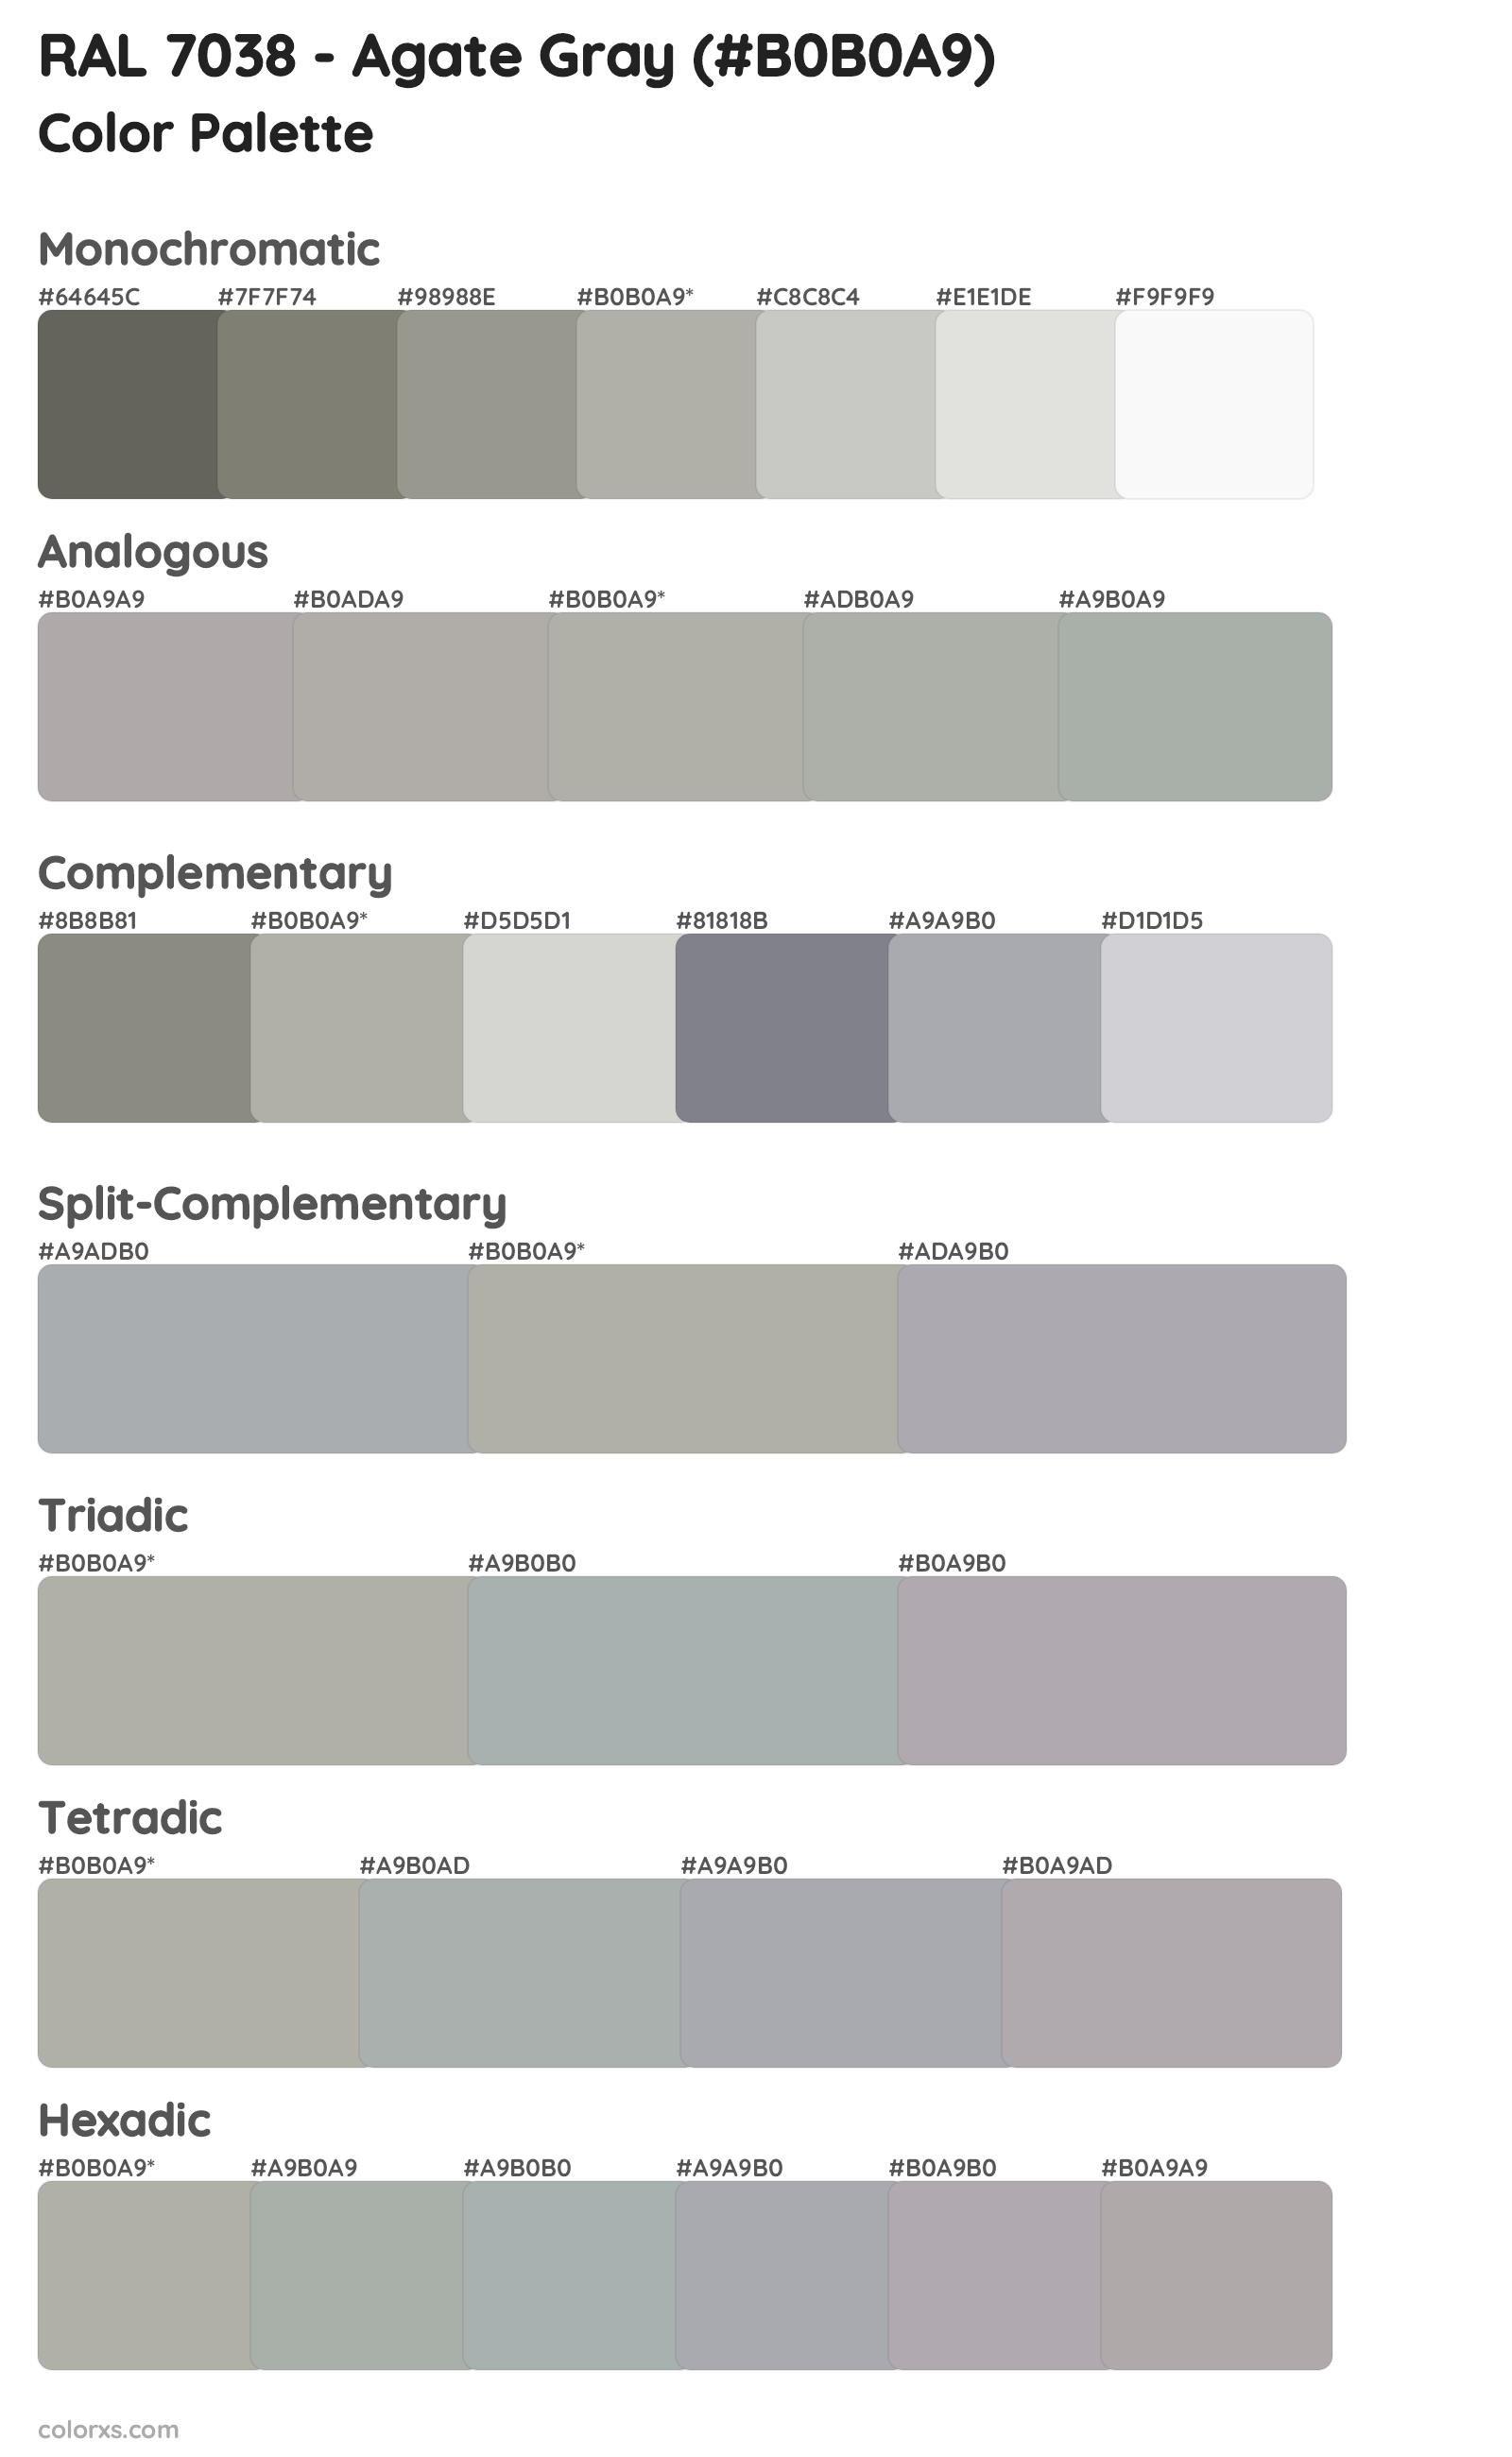 Ral Agate Gray Color Palettes And Color Scheme Combinations The Best